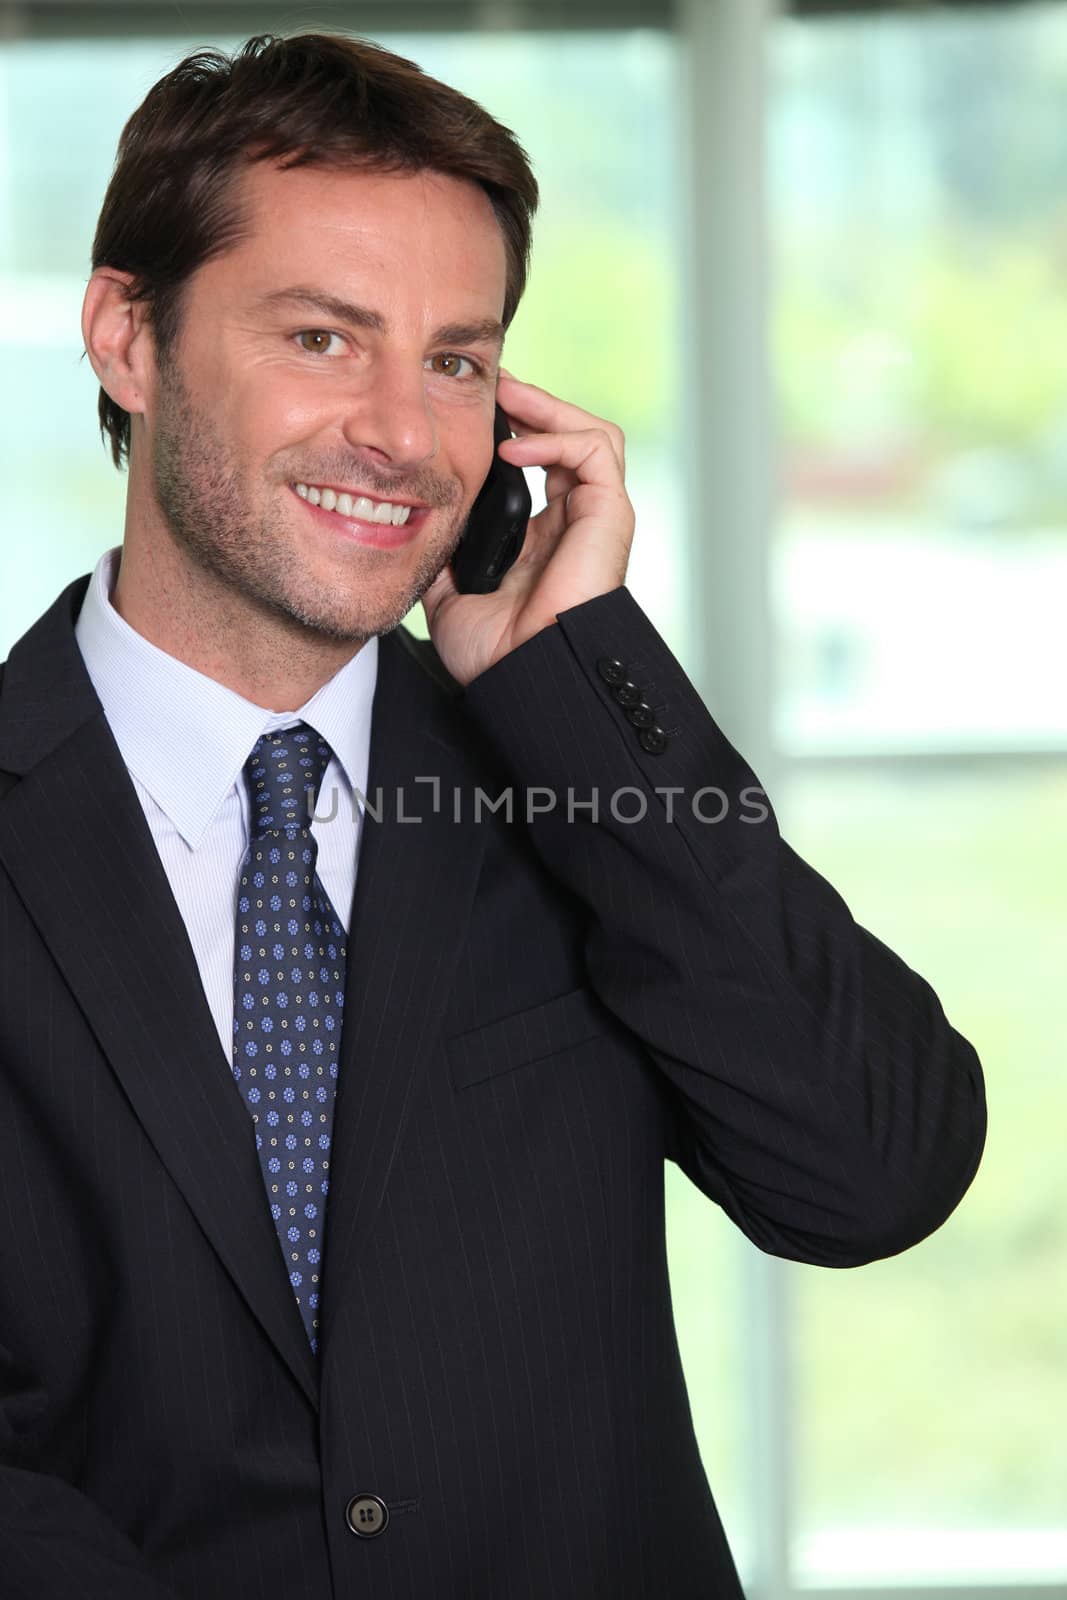 Smiling businessman using a telephone